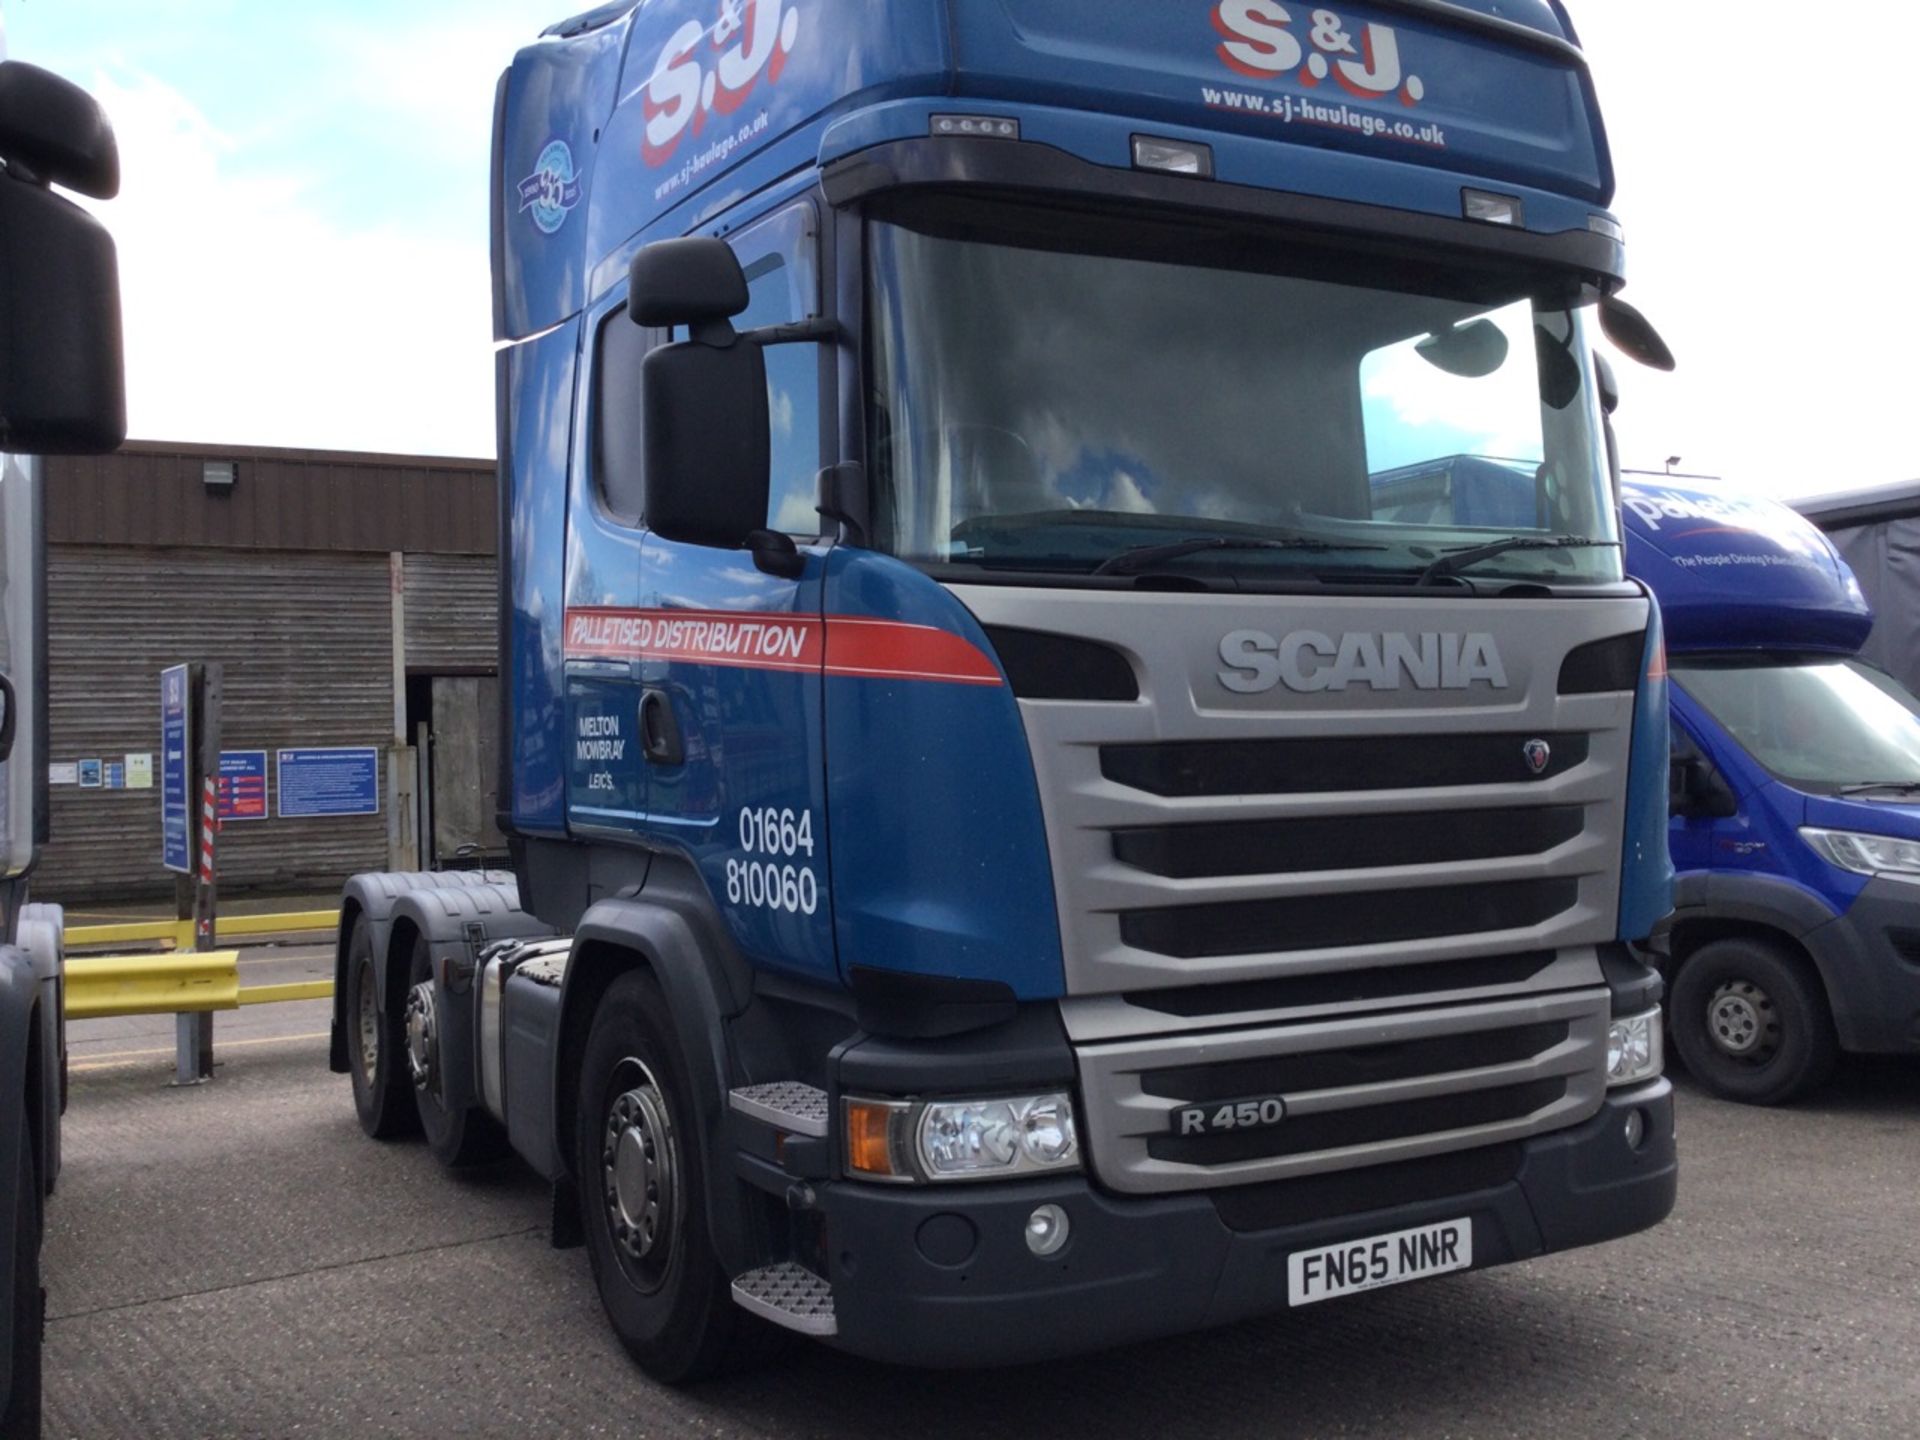 SCANIA R-SRS L-CLASS 6x2 Tractor Unit With Mid Lift Axle, Sleeper Cab, 887032kms, Mot Until 30/09/24 - Image 2 of 5